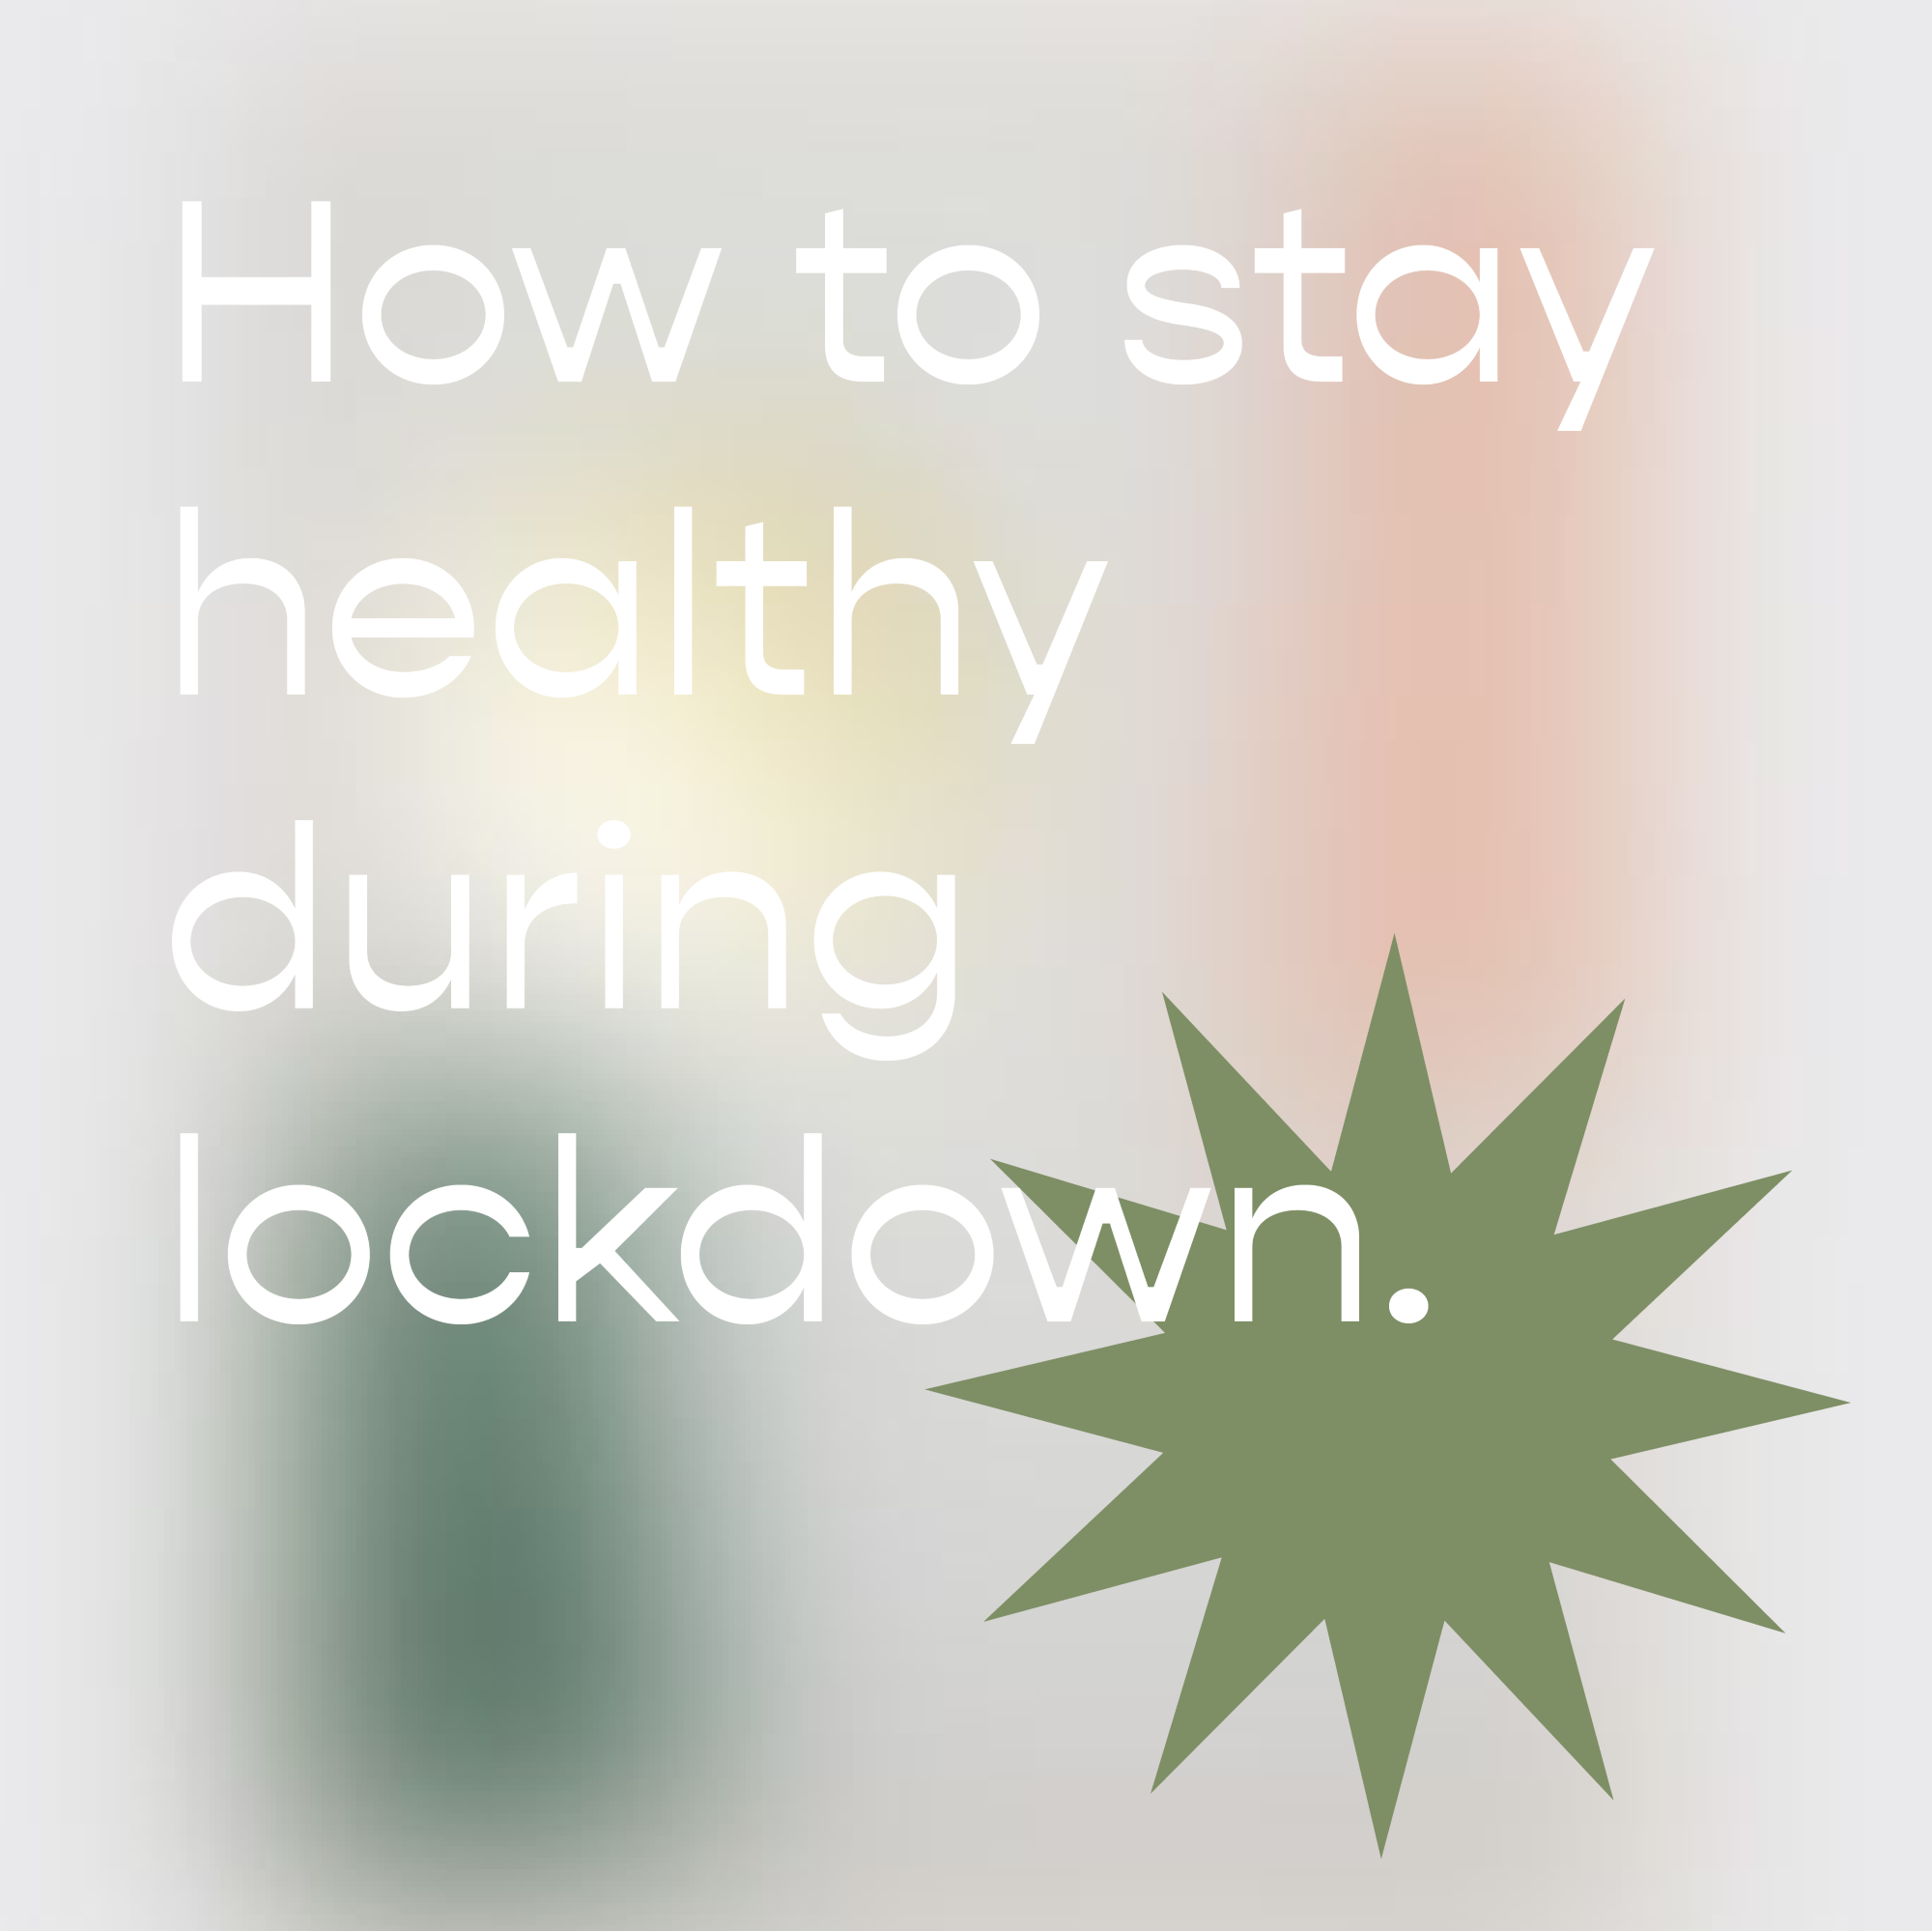 How to stay healthy during lockdown.